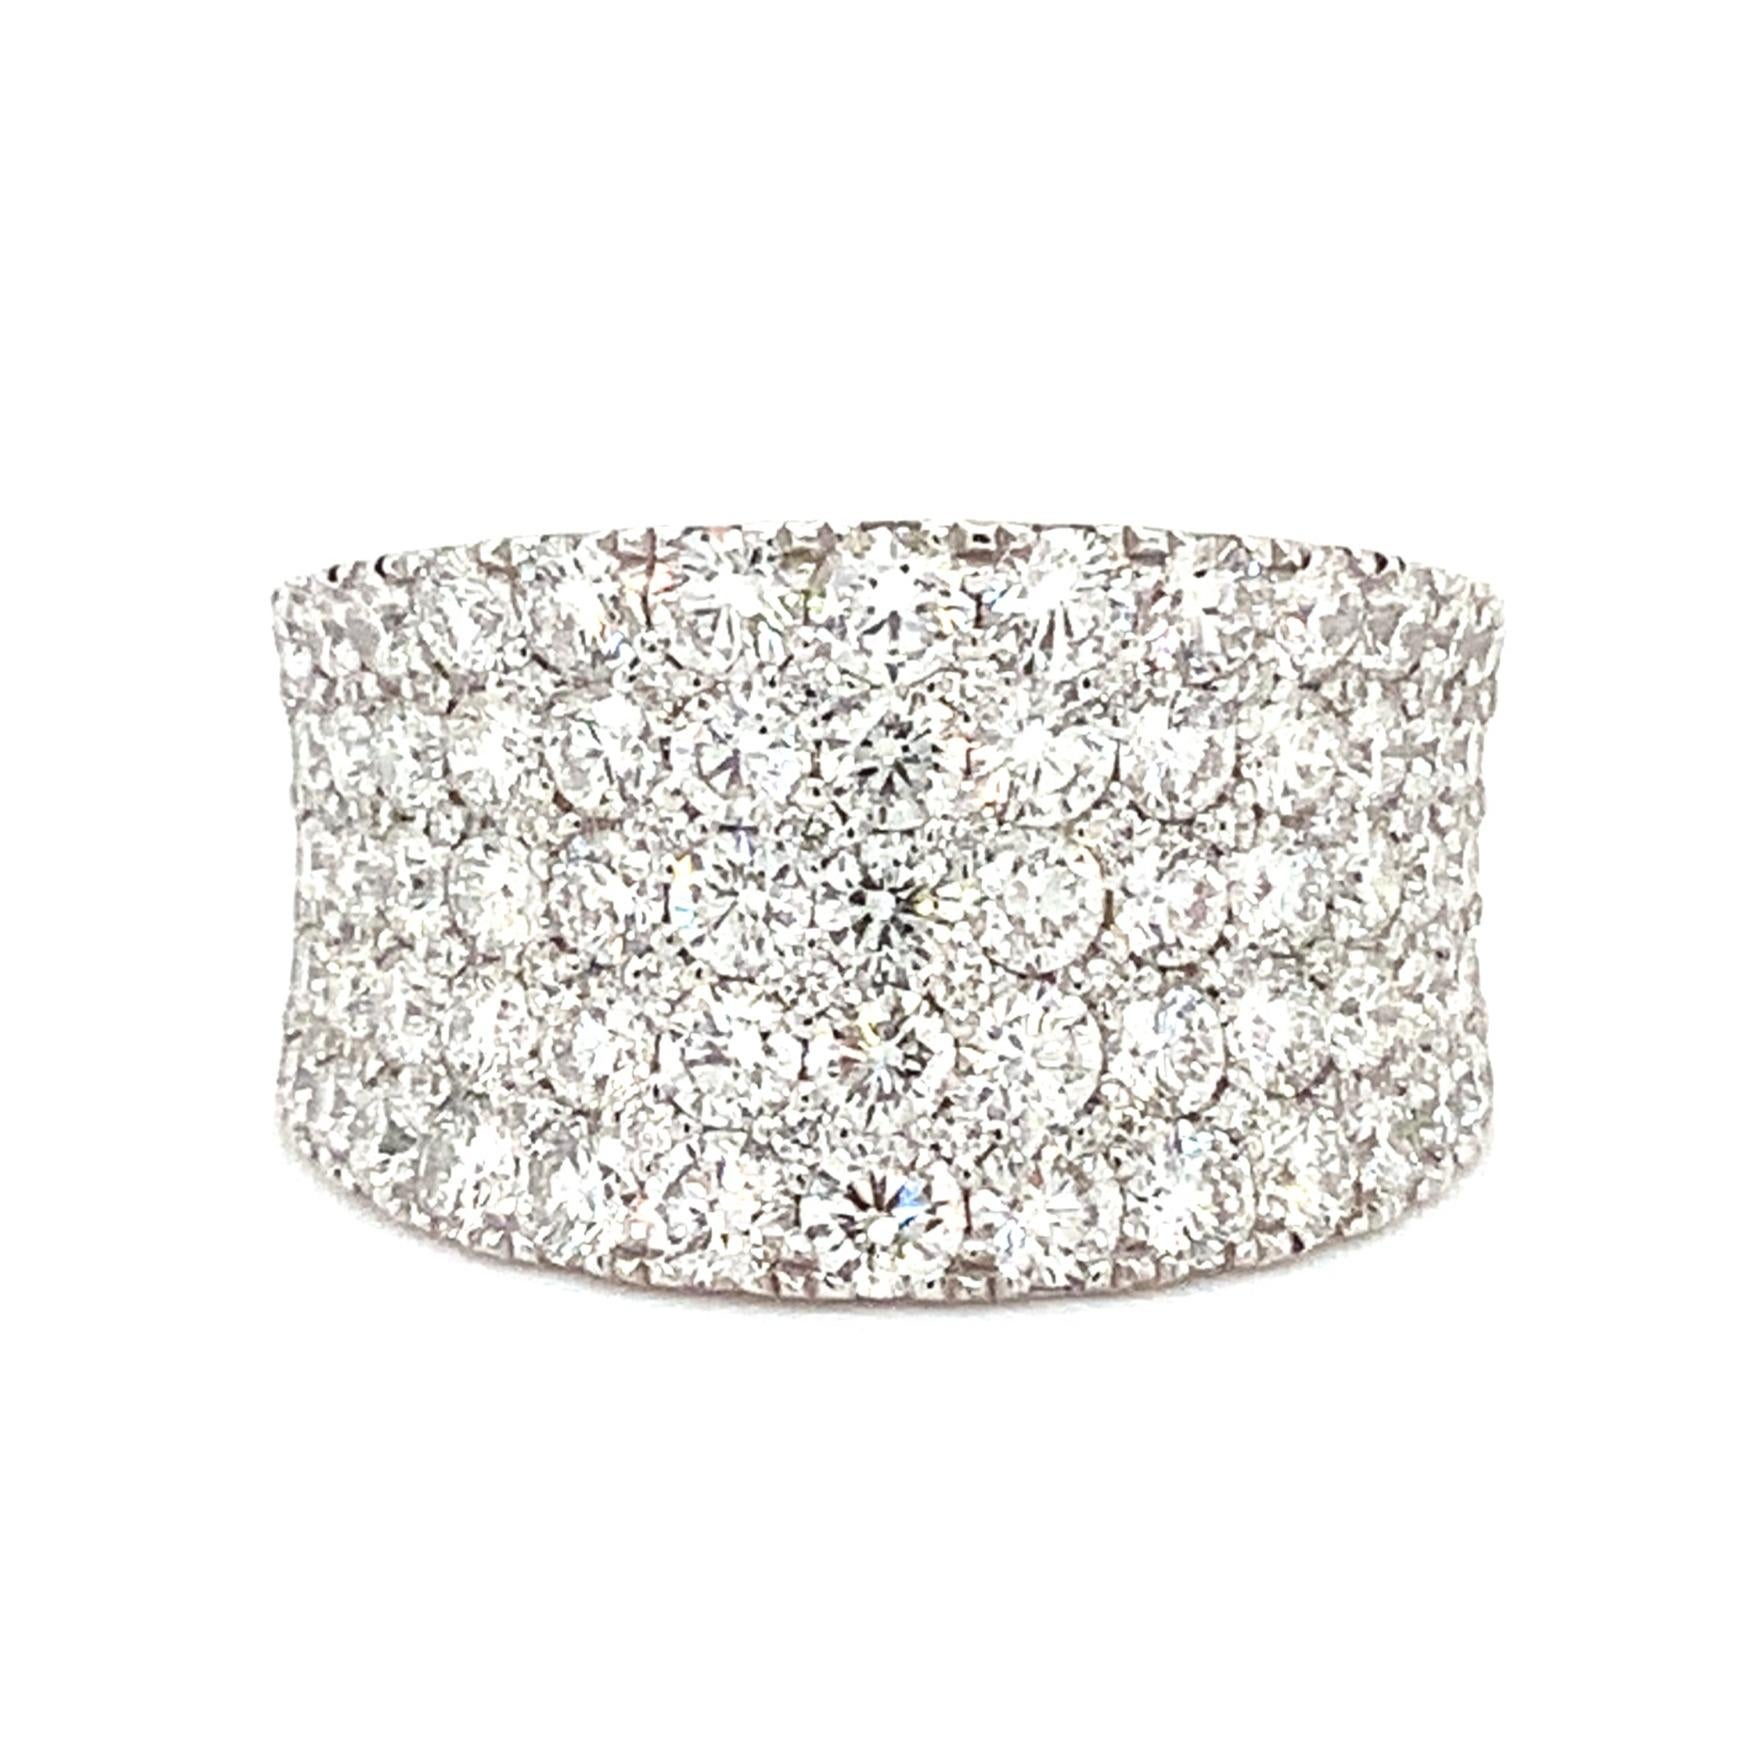 This exquisite Afarin Collection band features 5 rows of concave pavé diamonds set in 18Kt white gold, with a total weight of 2.71 carats. The precision cutting of the stones accentuates their clarity and sparkle, making this a timeless piece of